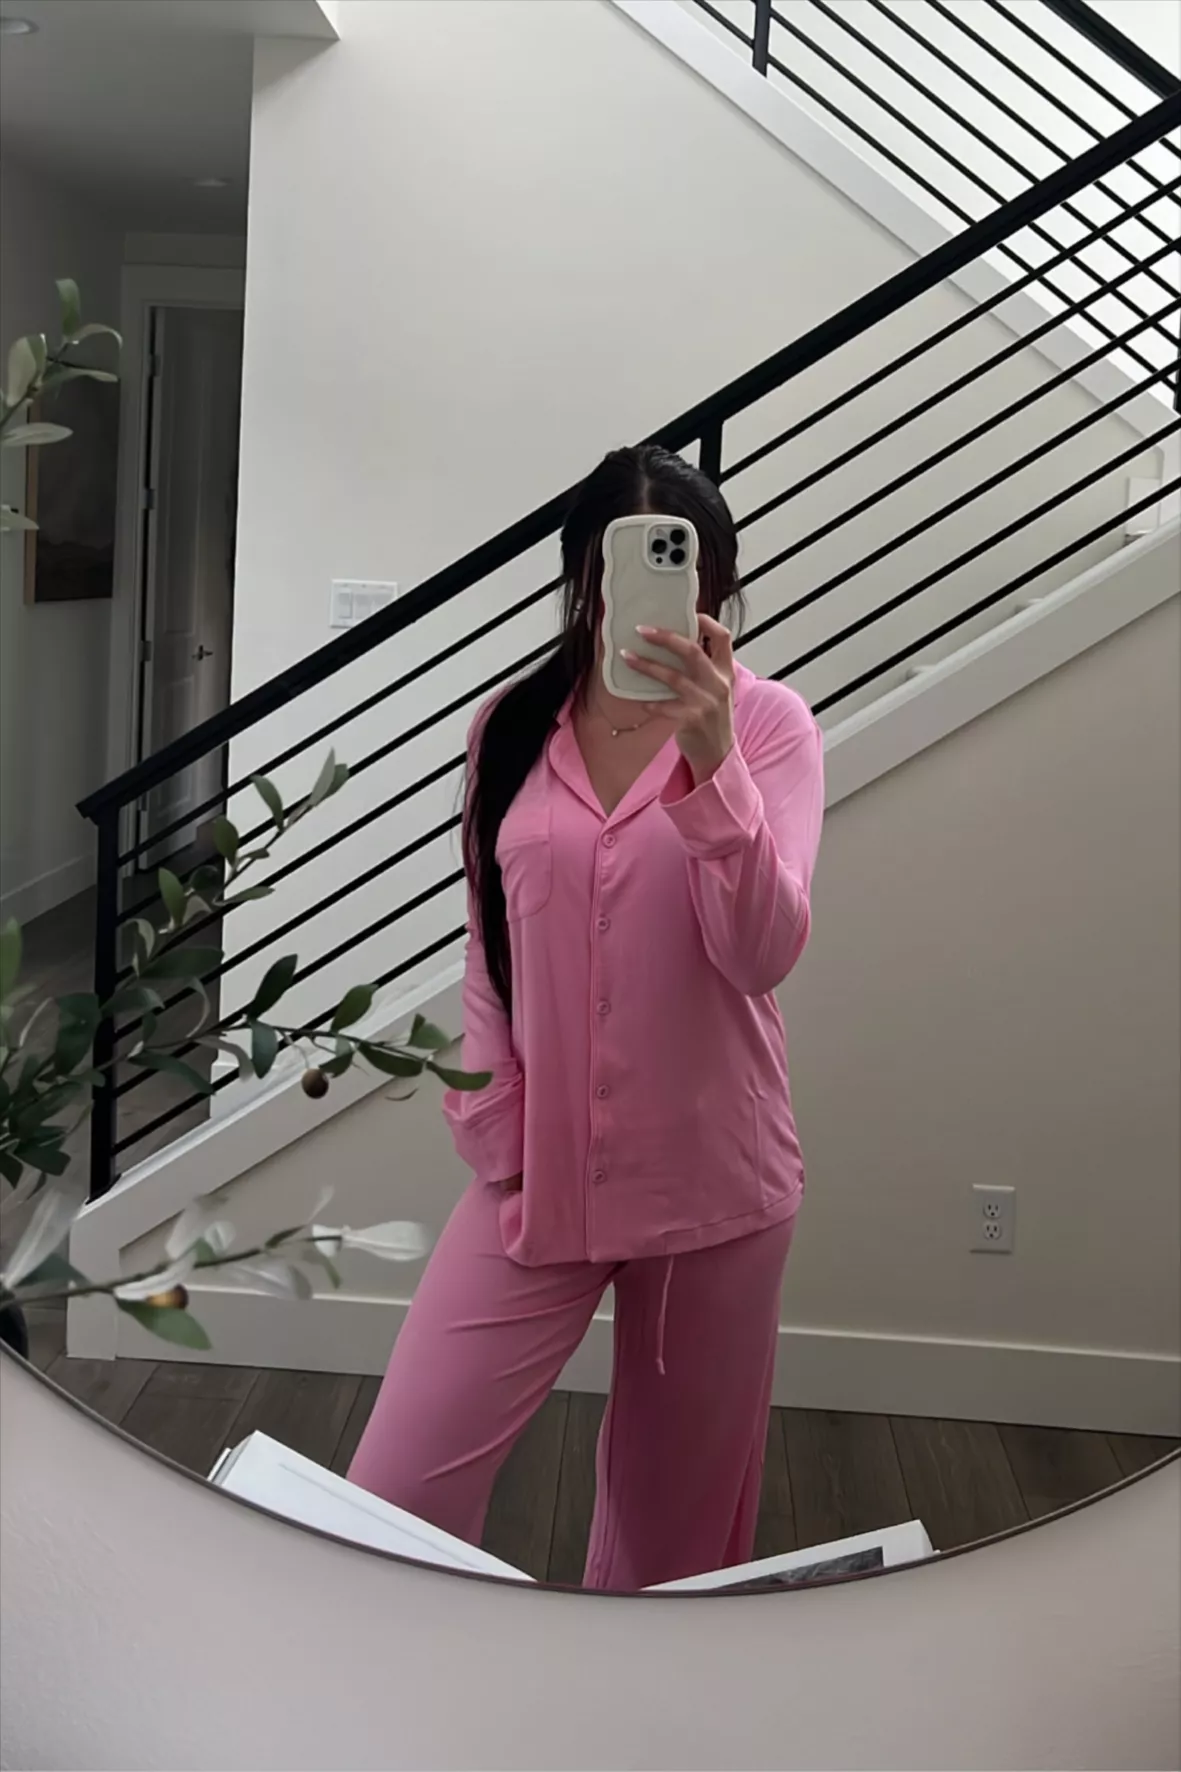 Skims soft lounge PJs review  Gallery posted by Lexirosenstein